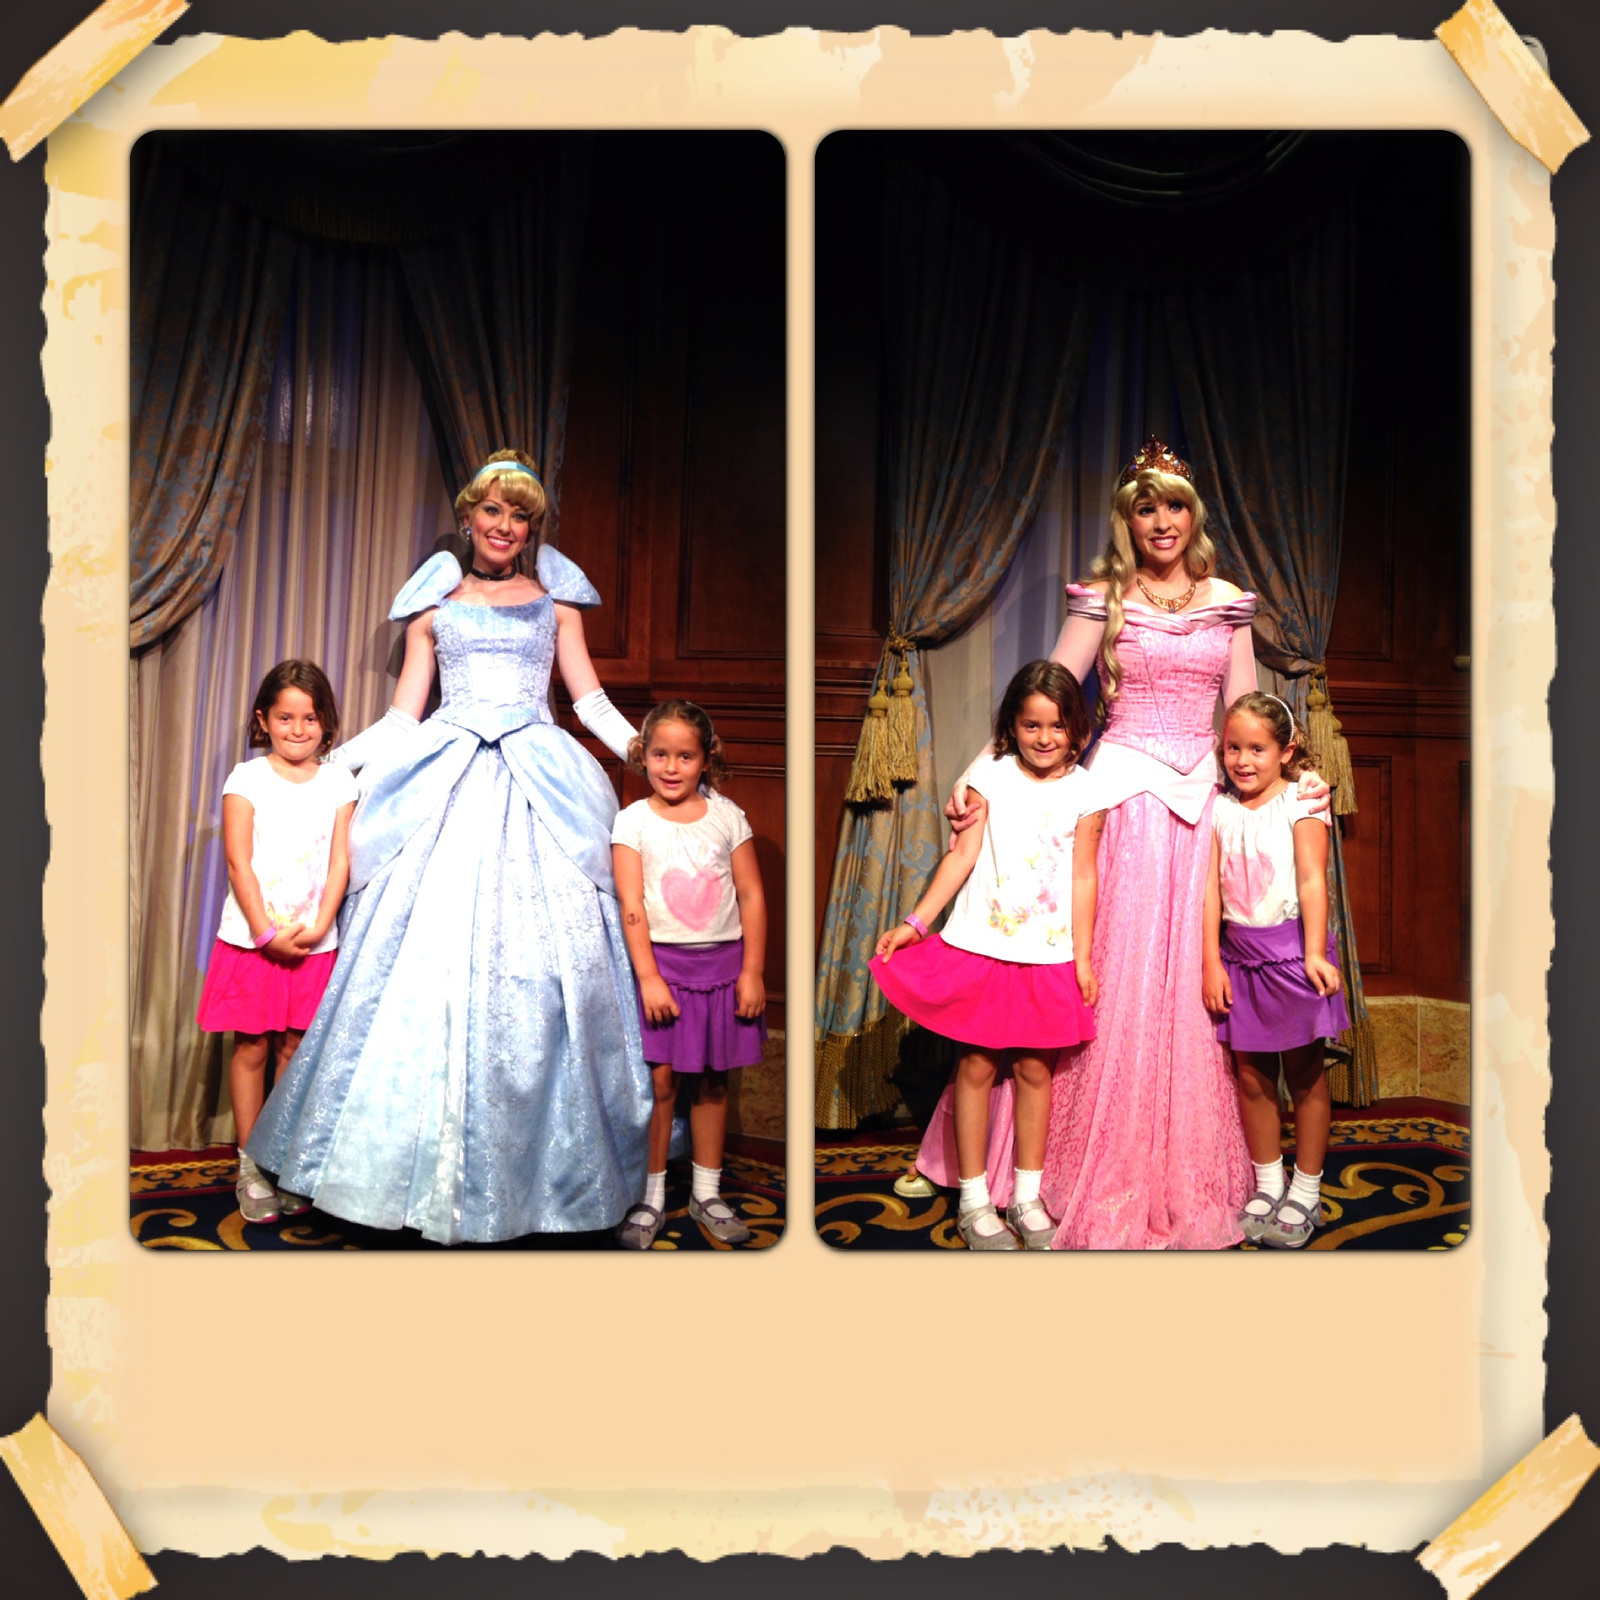 meeting the princesses in disney world